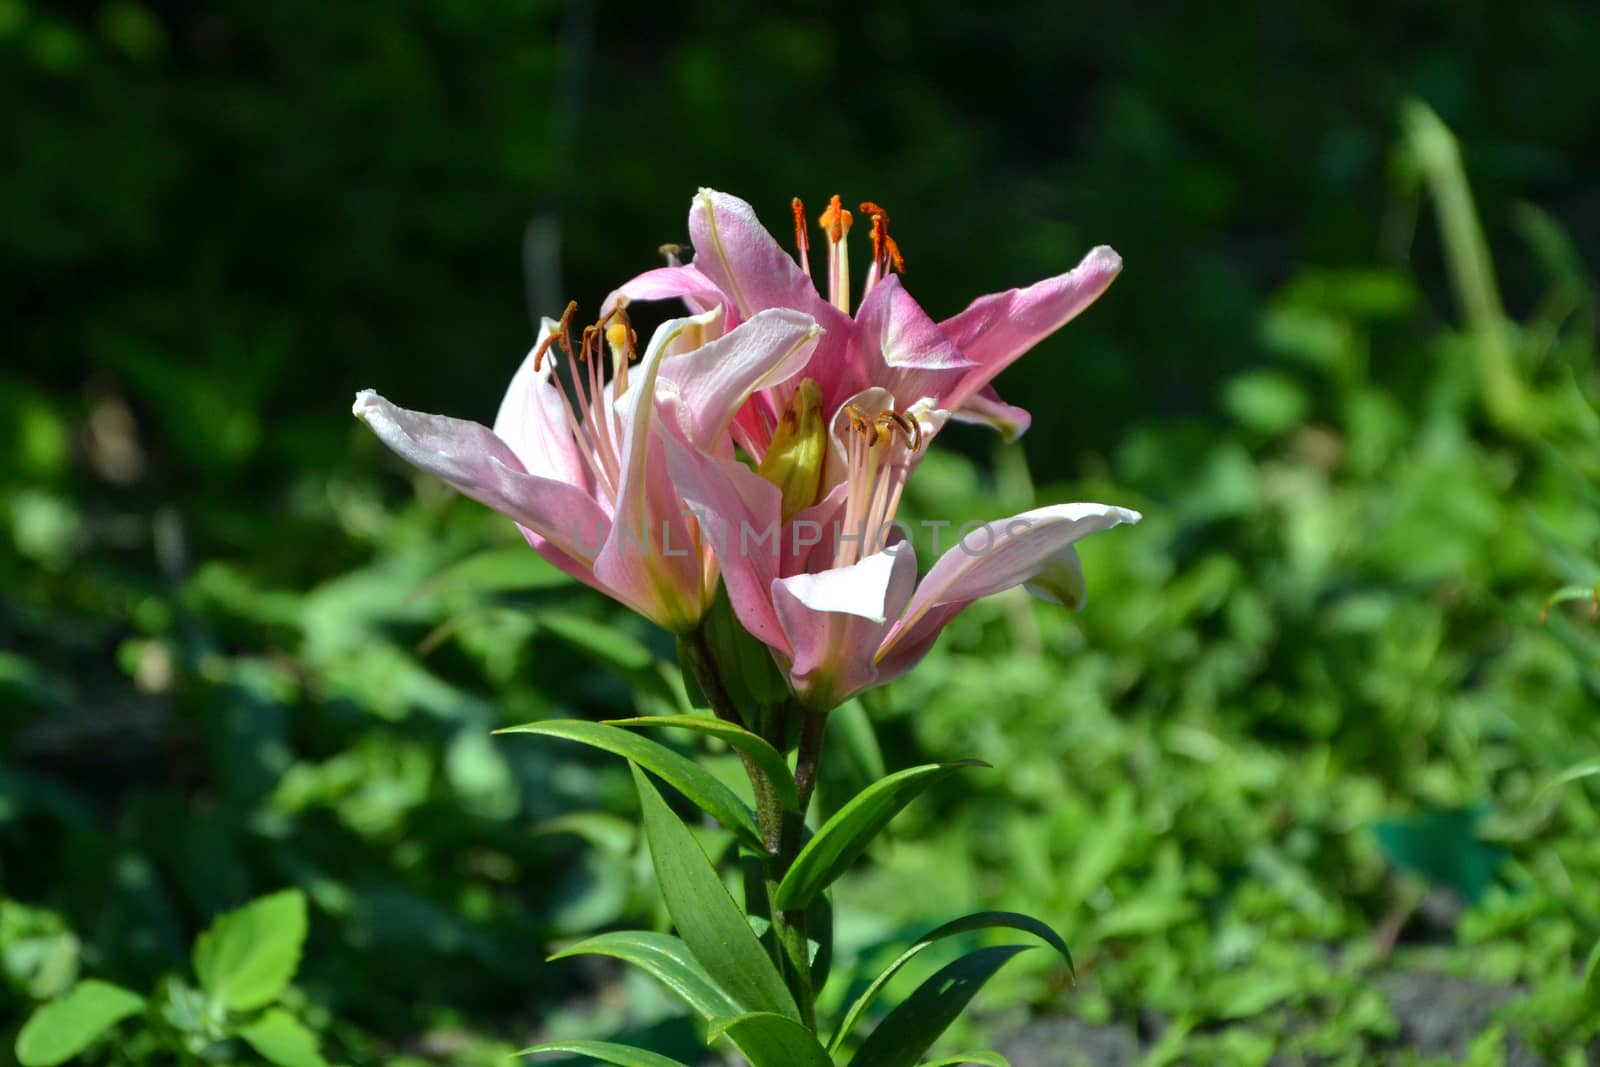 The pink lily blossoms in a garden